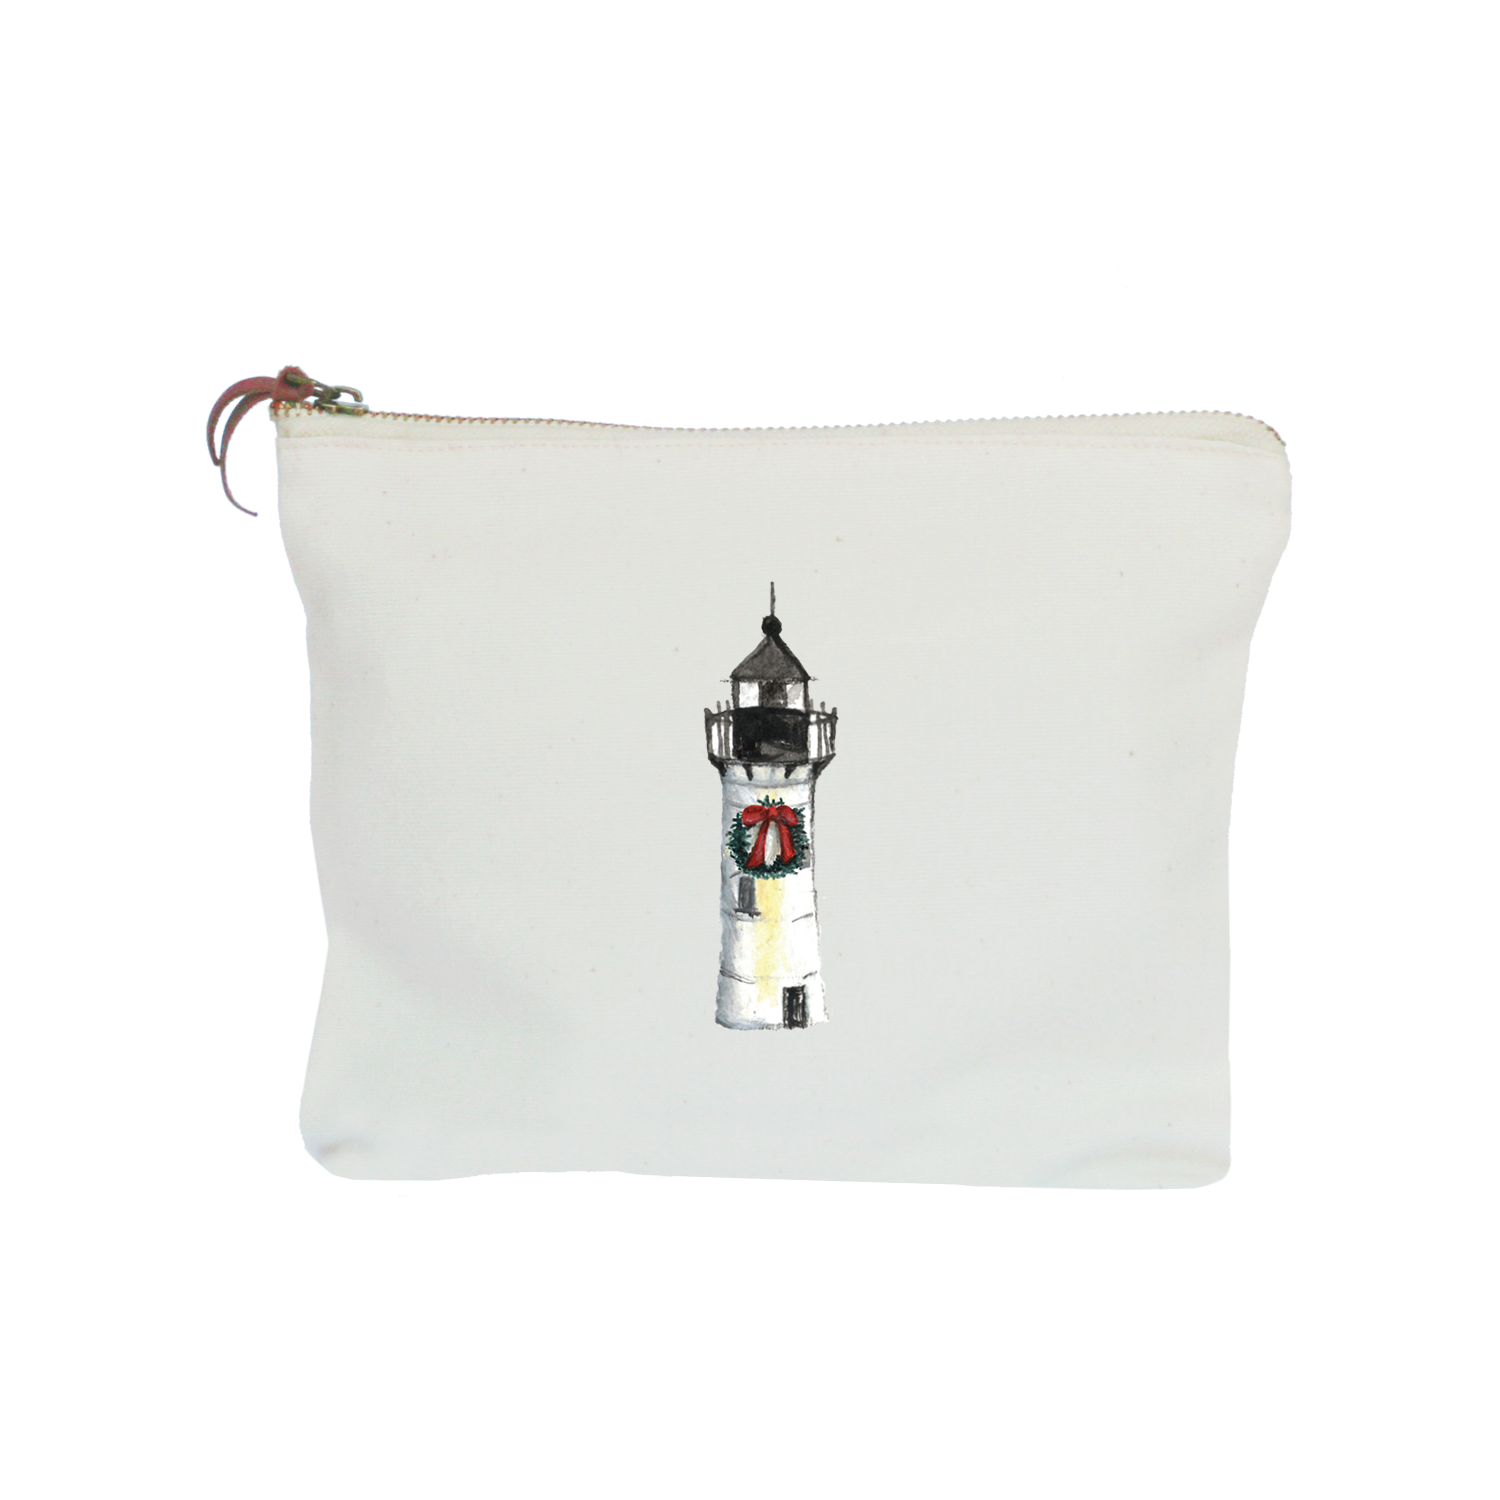 nubble lighthouse with wreath zipper pouch